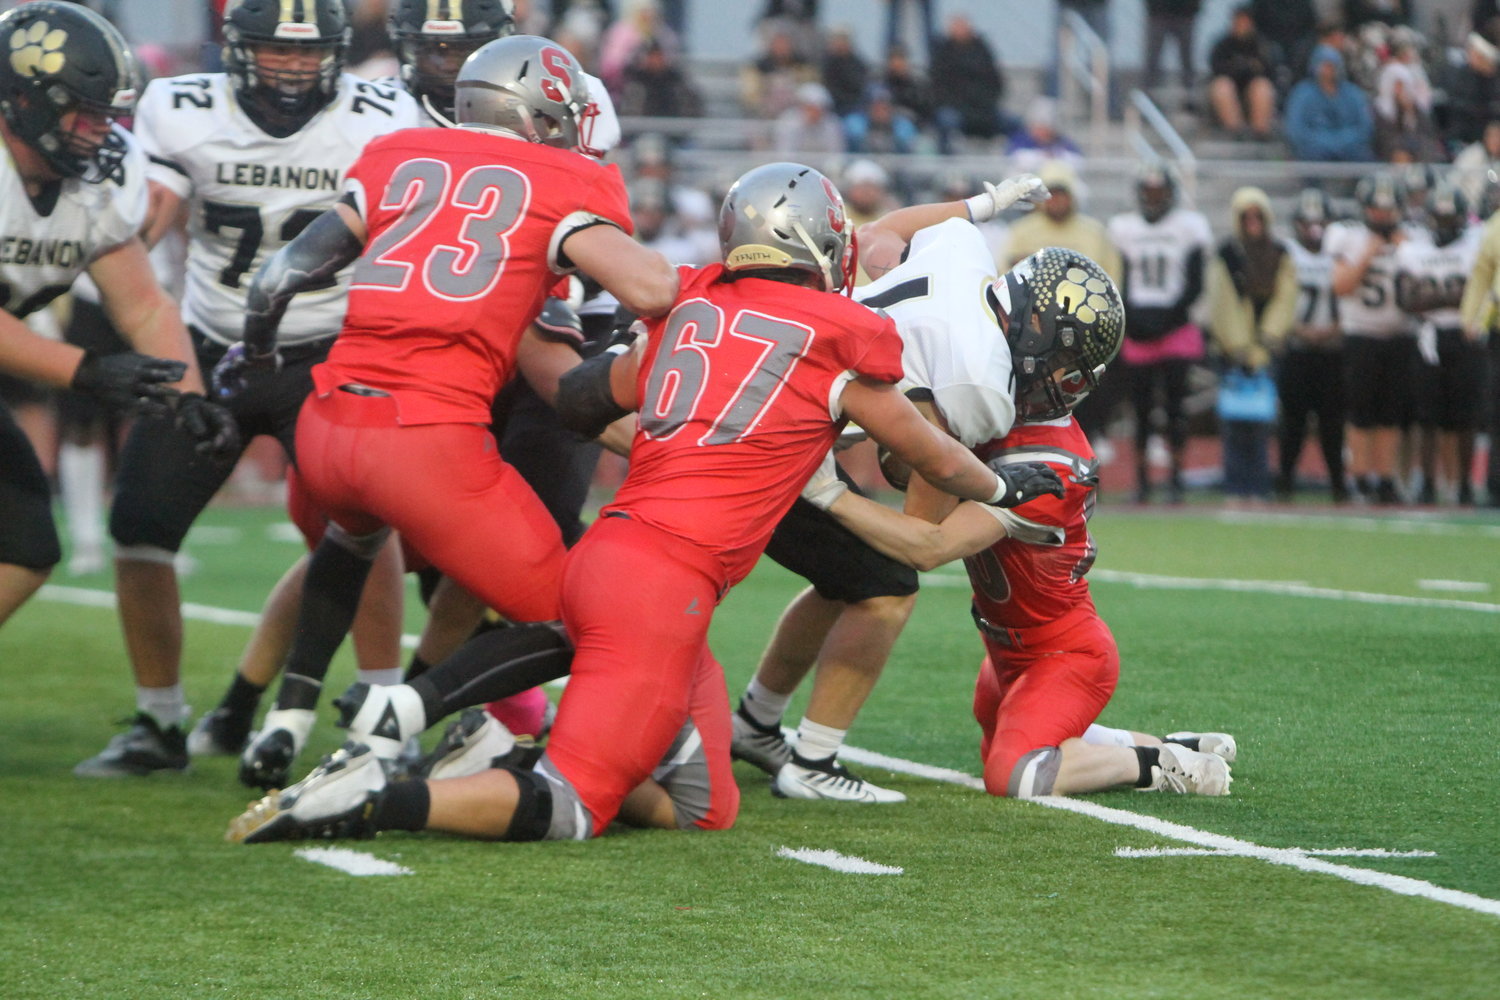 Southmont's defense held their own against a big-play Tiger offense.